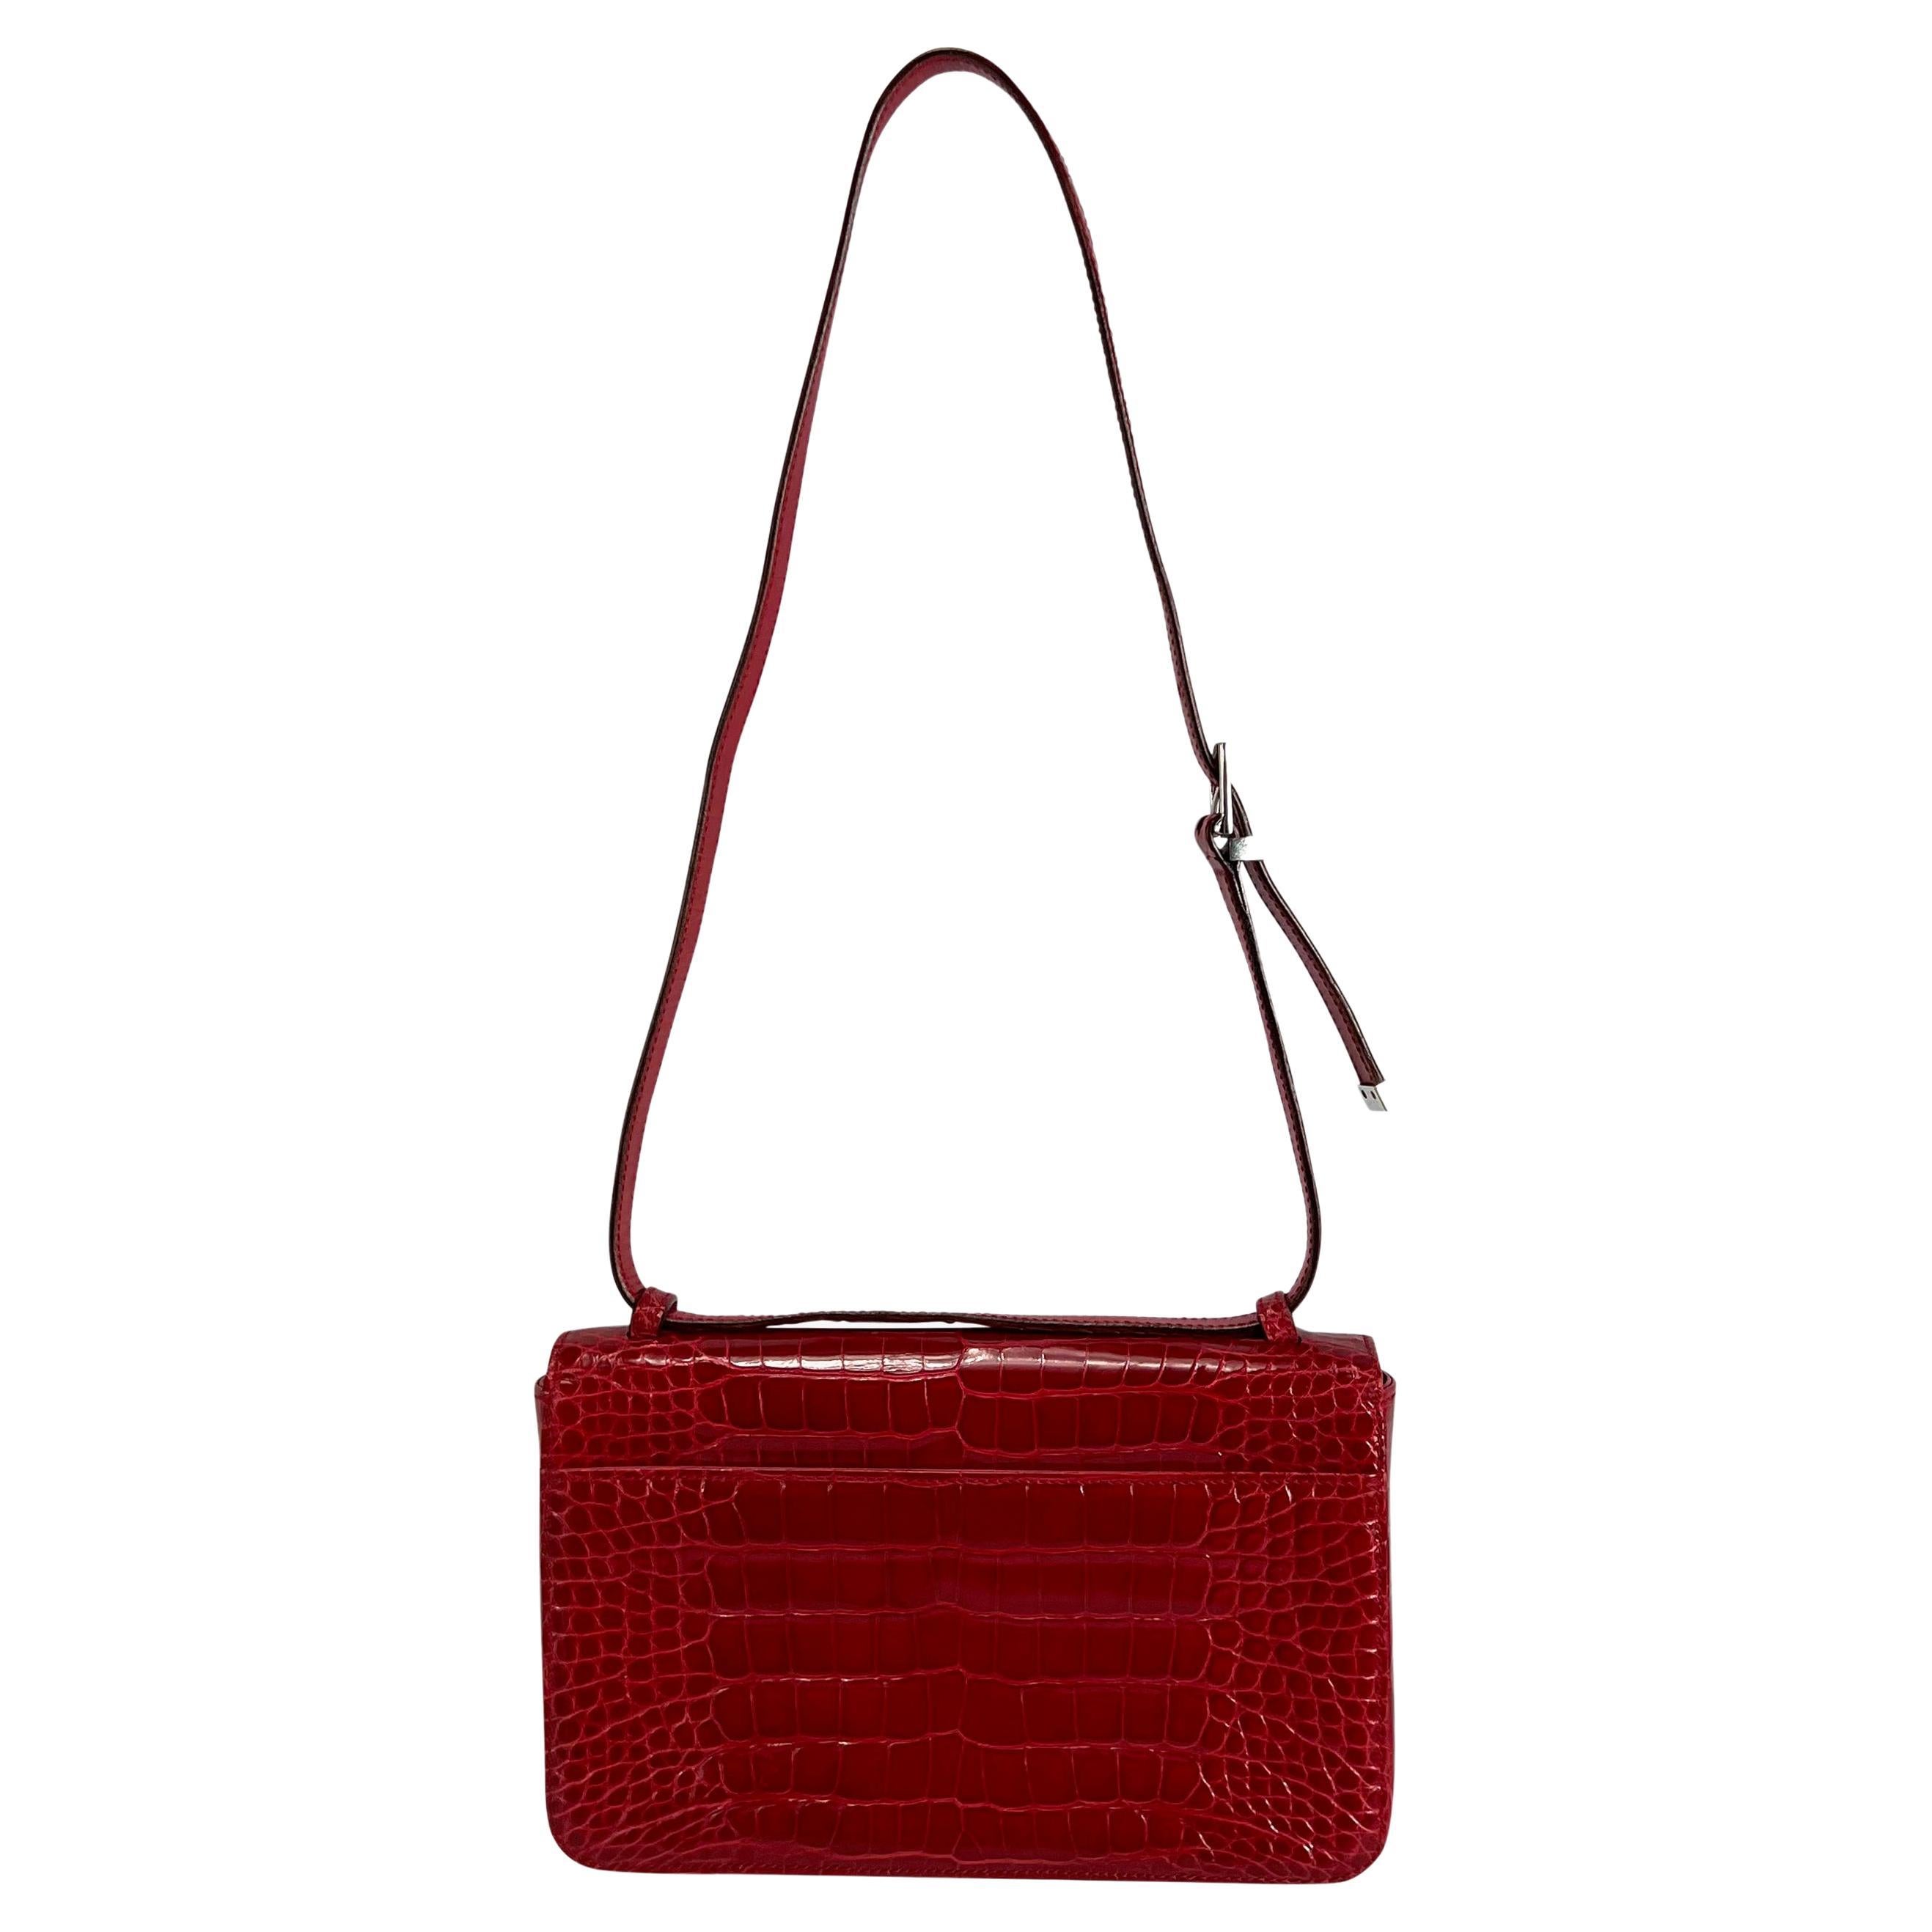 S/S 1998 Gucci by Tom Ford Runway Red Alligator Adjustable Crossbody G Logo Bag For Sale 3